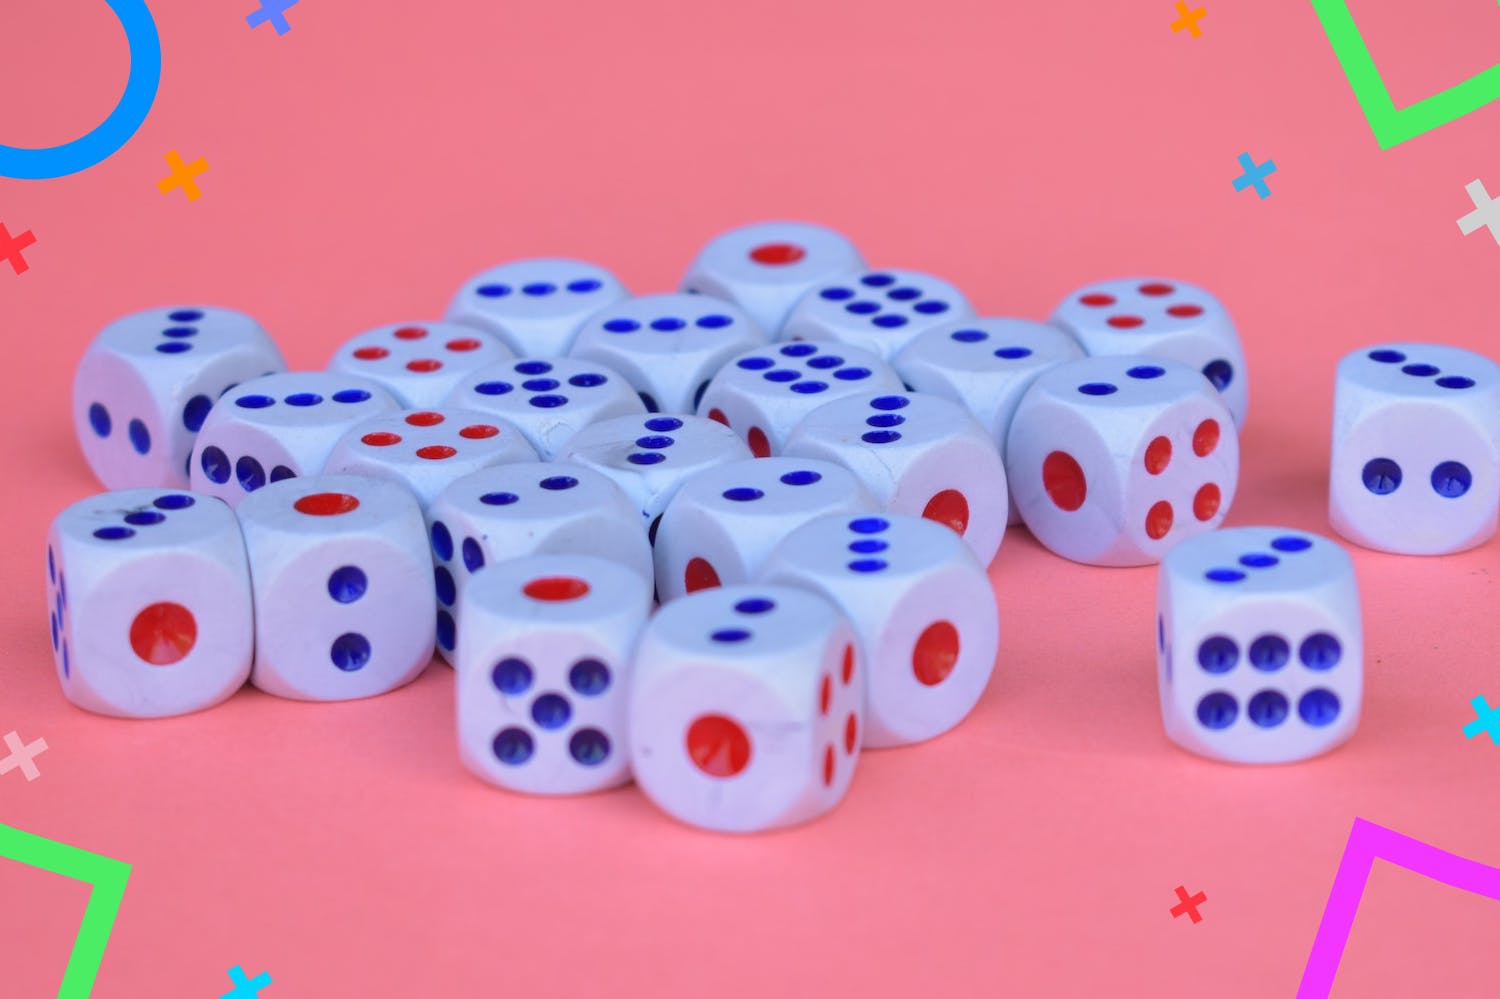 Dice on a table